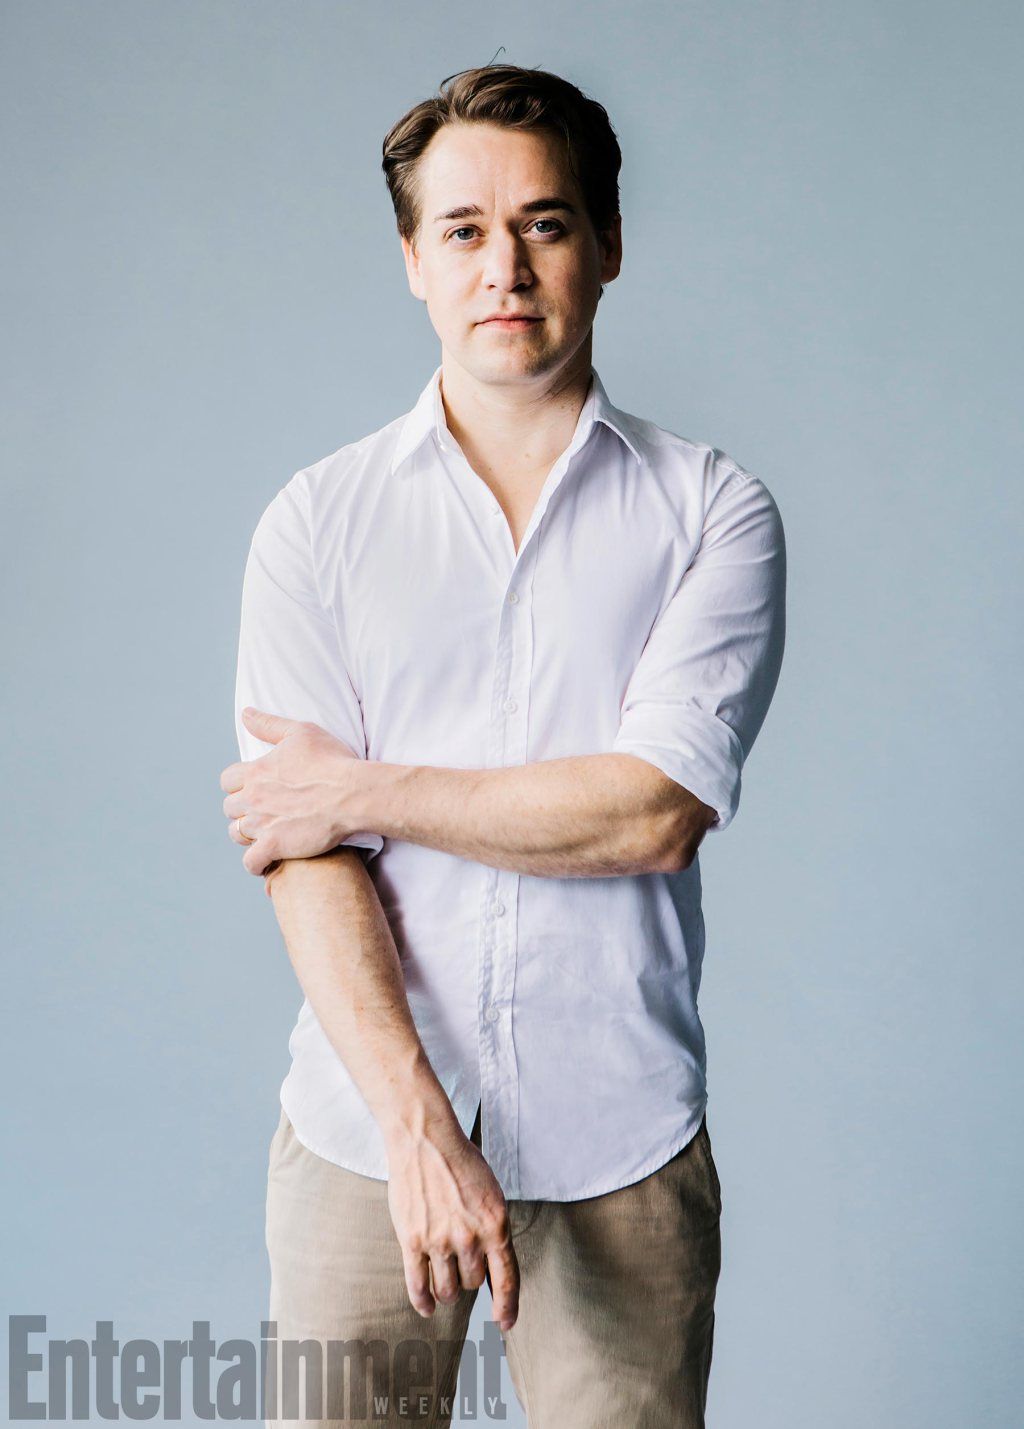 Life After 'Grey's': T.R. Knight Has Kept Busy Since Leaving